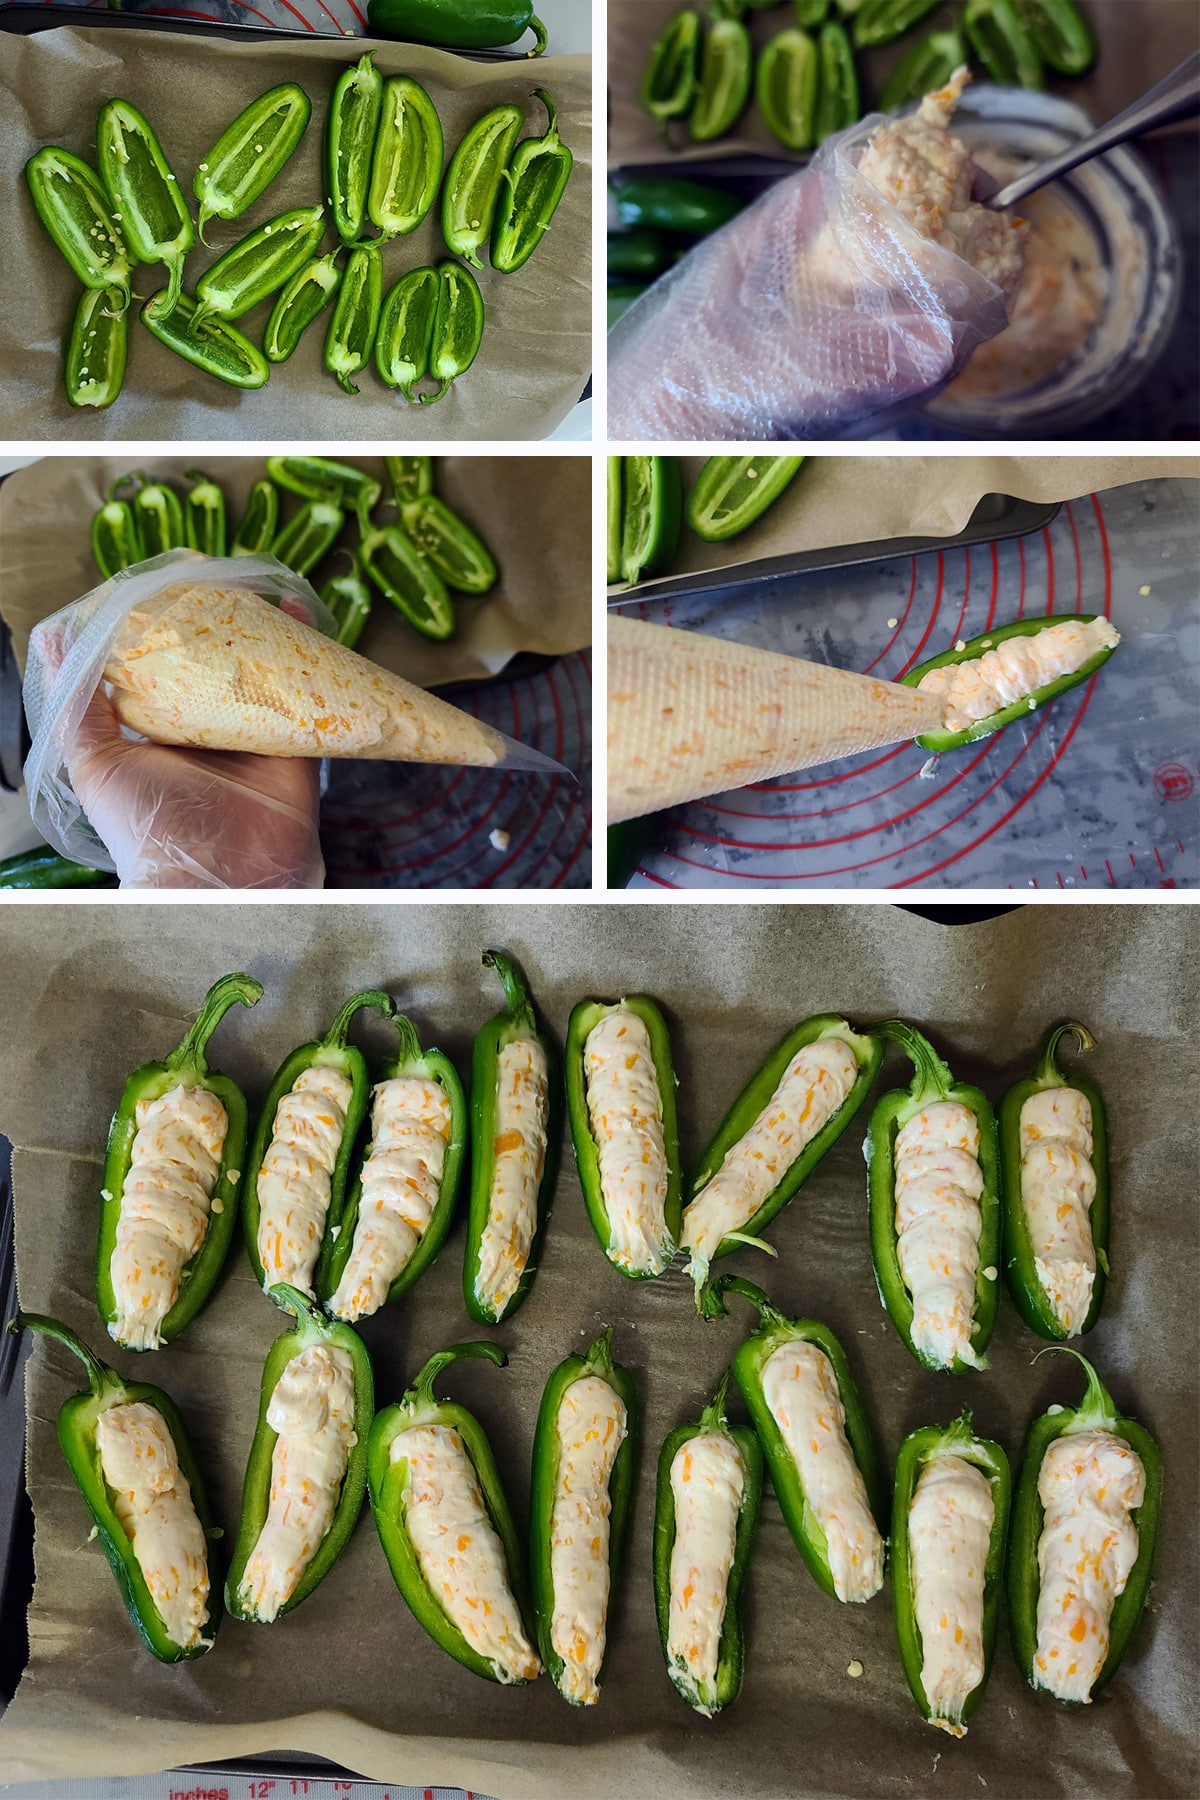 A 5 part image showing the jalapeno halves being piped with filling.